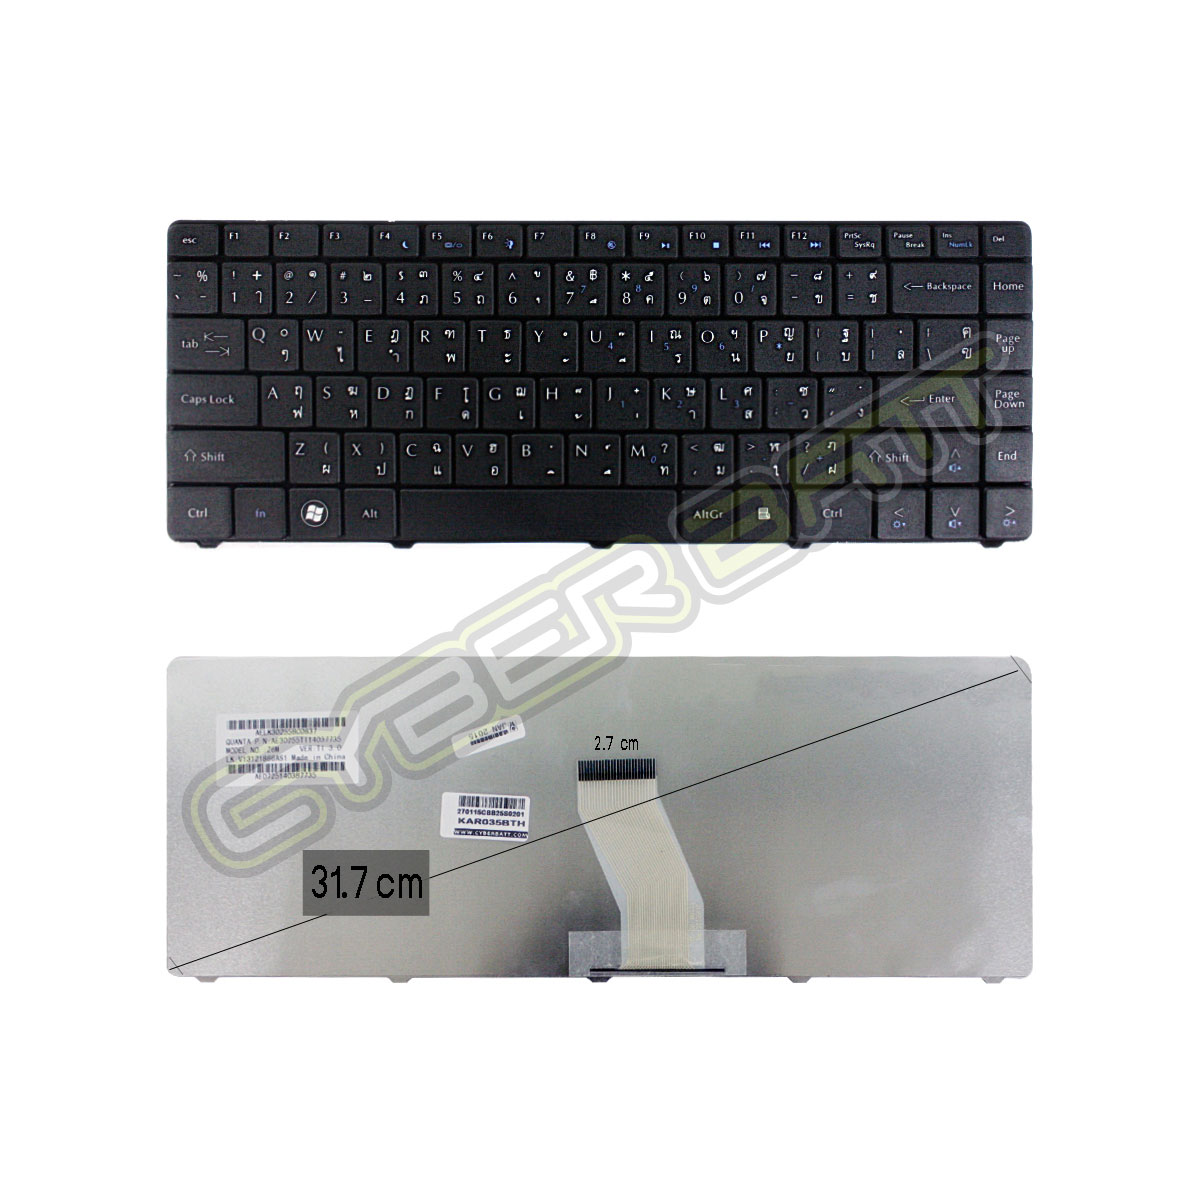 Keyboard Acer eMachines D725 Black TH 